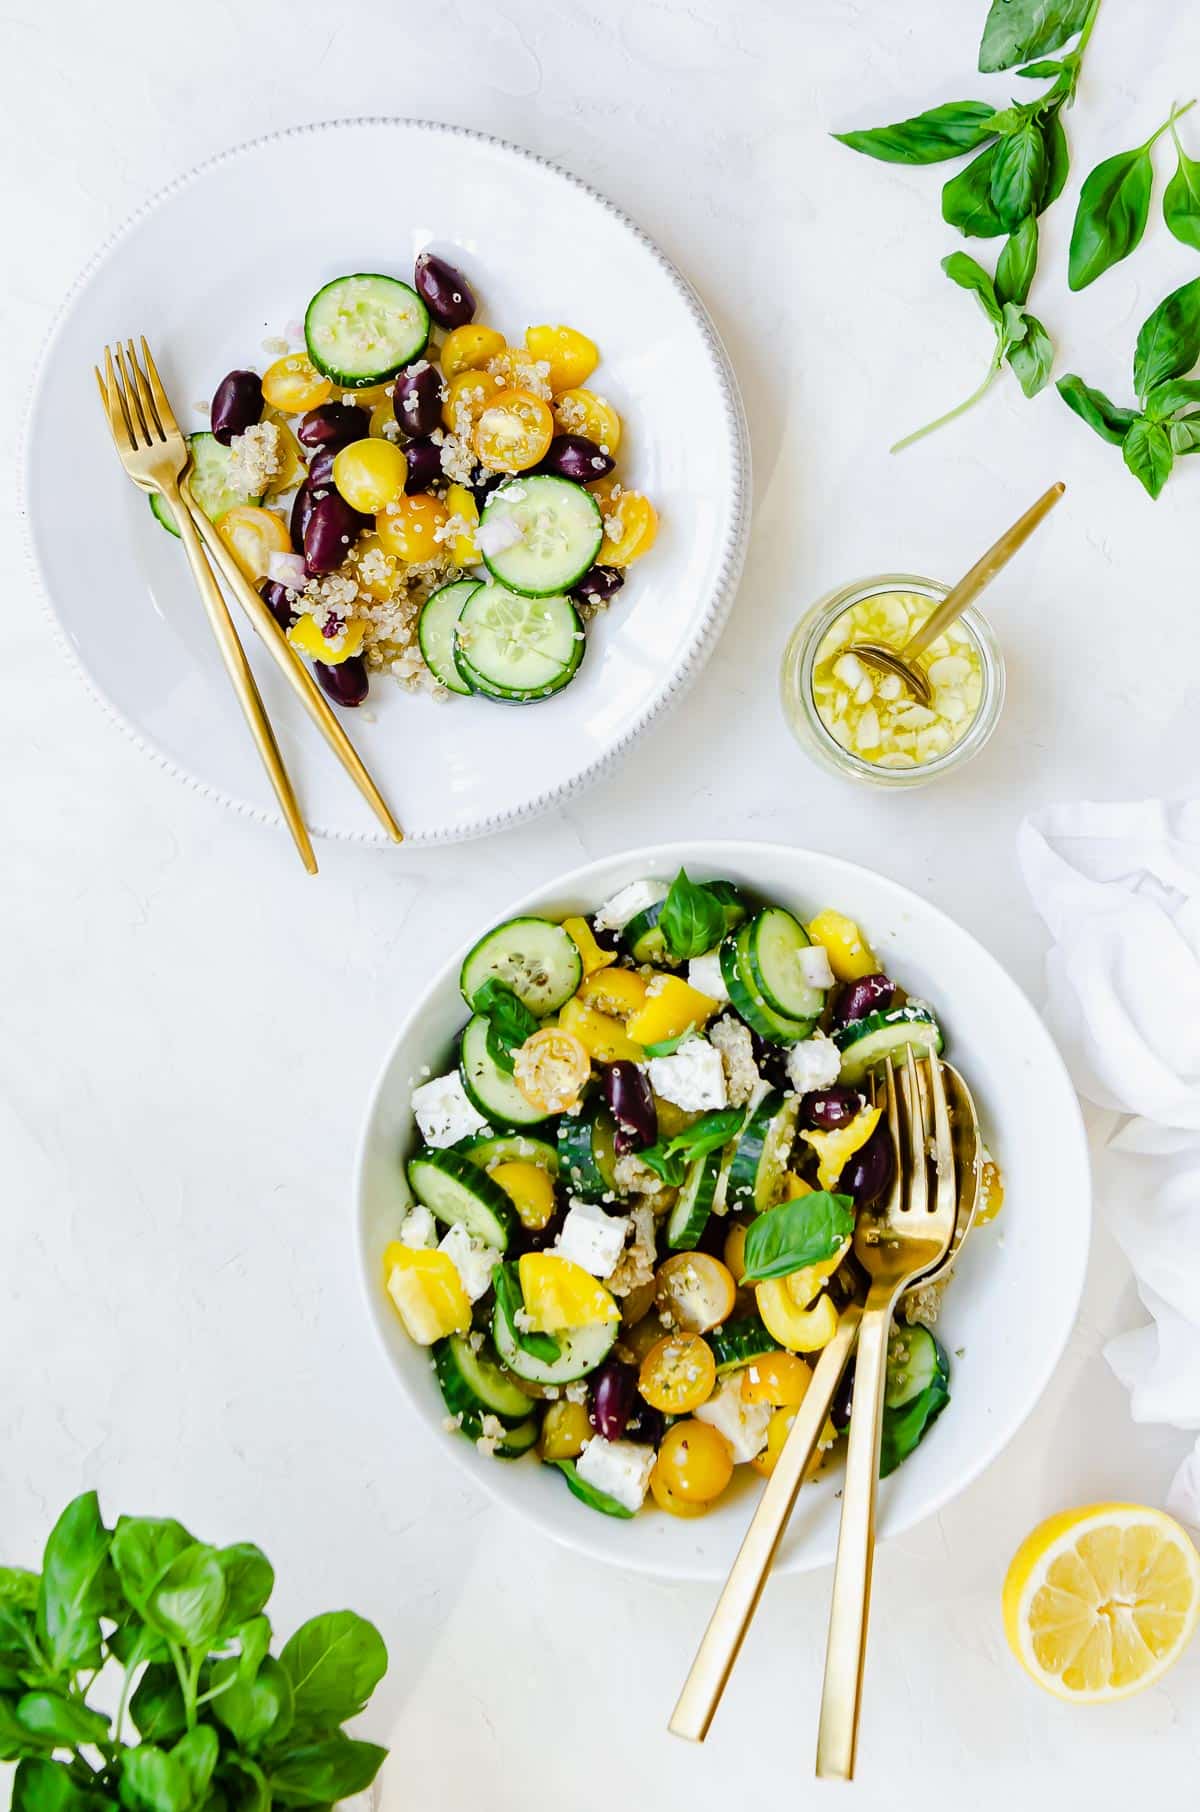 Serving bowl with a Mediterranean Cucumber Tomato salad with cucumbers, yellow tomatoes, kalamata olives, feta, basil, yellow pepper and quinoa, with a lemon dressing.